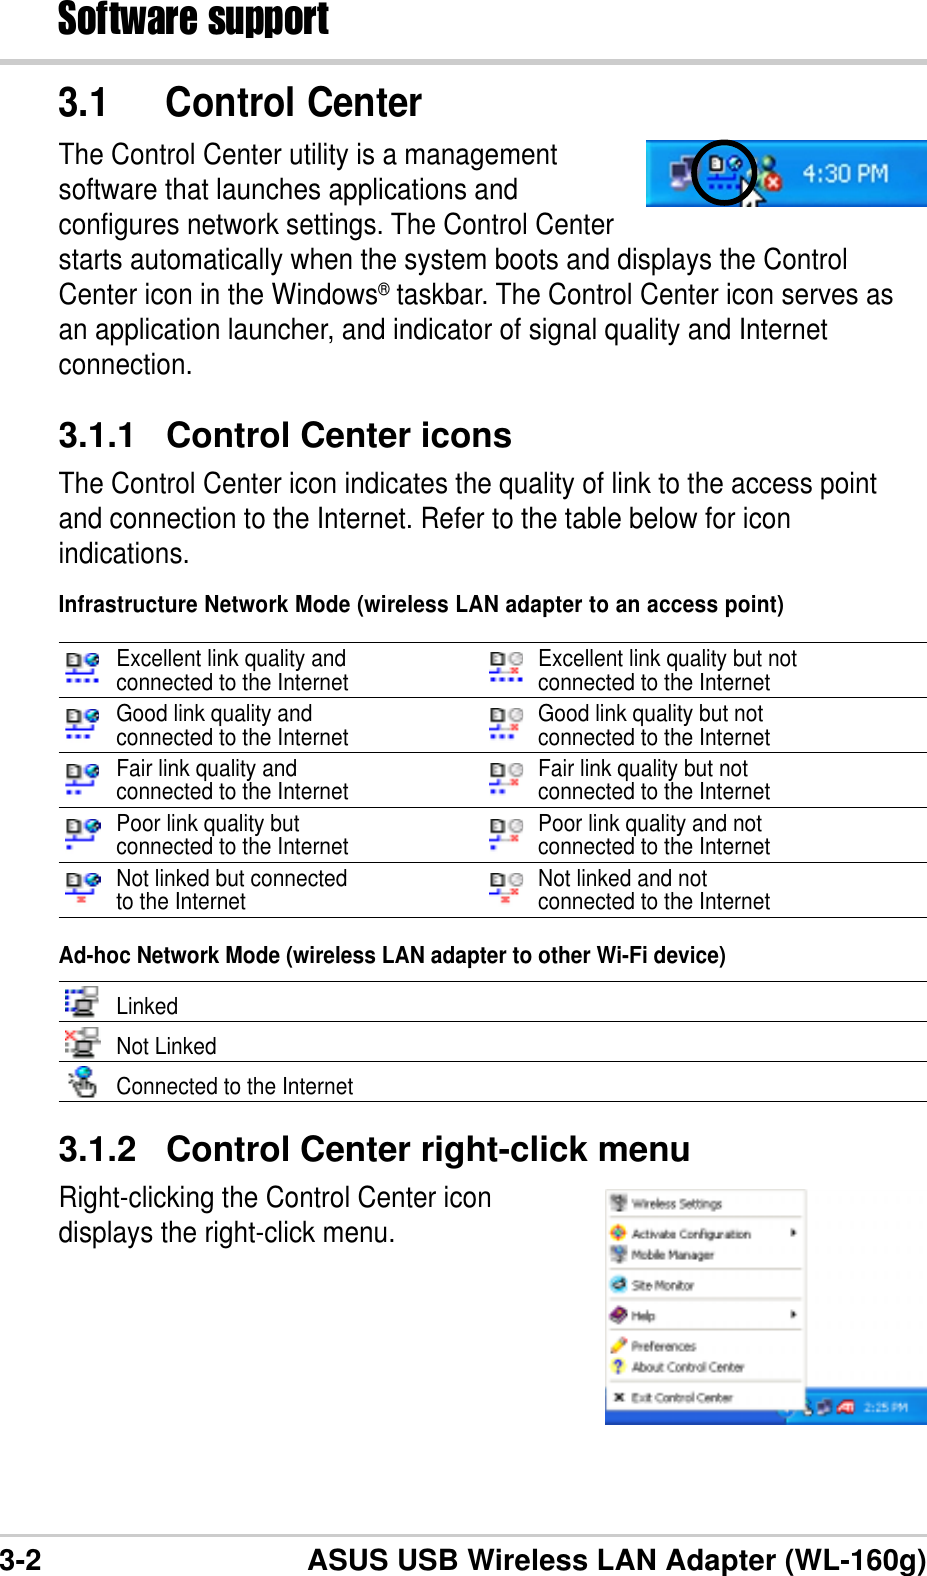 3-2 ASUS USB Wireless LAN Adapter (WL-160g)Software support3.1.2 Control Center right-click menuRight-clicking the Control Center icondisplays the right-click menu.3.1 Control CenterThe Control Center utility is a managementsoftware that launches applications andconfigures network settings. The Control Centerstarts automatically when the system boots and displays the ControlCenter icon in the Windows® taskbar. The Control Center icon serves asan application launcher, and indicator of signal quality and Internetconnection.3.1.1 Control Center iconsThe Control Center icon indicates the quality of link to the access pointand connection to the Internet. Refer to the table below for iconindications.Infrastructure Network Mode (wireless LAN adapter to an access point)Excellent link quality and Excellent link quality but notconnected to the Internet connected to the InternetGood link quality and Good link quality but notconnected to the Internet connected to the InternetFair link quality and Fair link quality but notconnected to the Internet connected to the InternetPoor link quality but Poor link quality and notconnected to the Internet connected to the InternetNot linked but connected Not linked and notto the Internet connected to the InternetAd-hoc Network Mode (wireless LAN adapter to other Wi-Fi device)LinkedNot LinkedConnected to the Internet